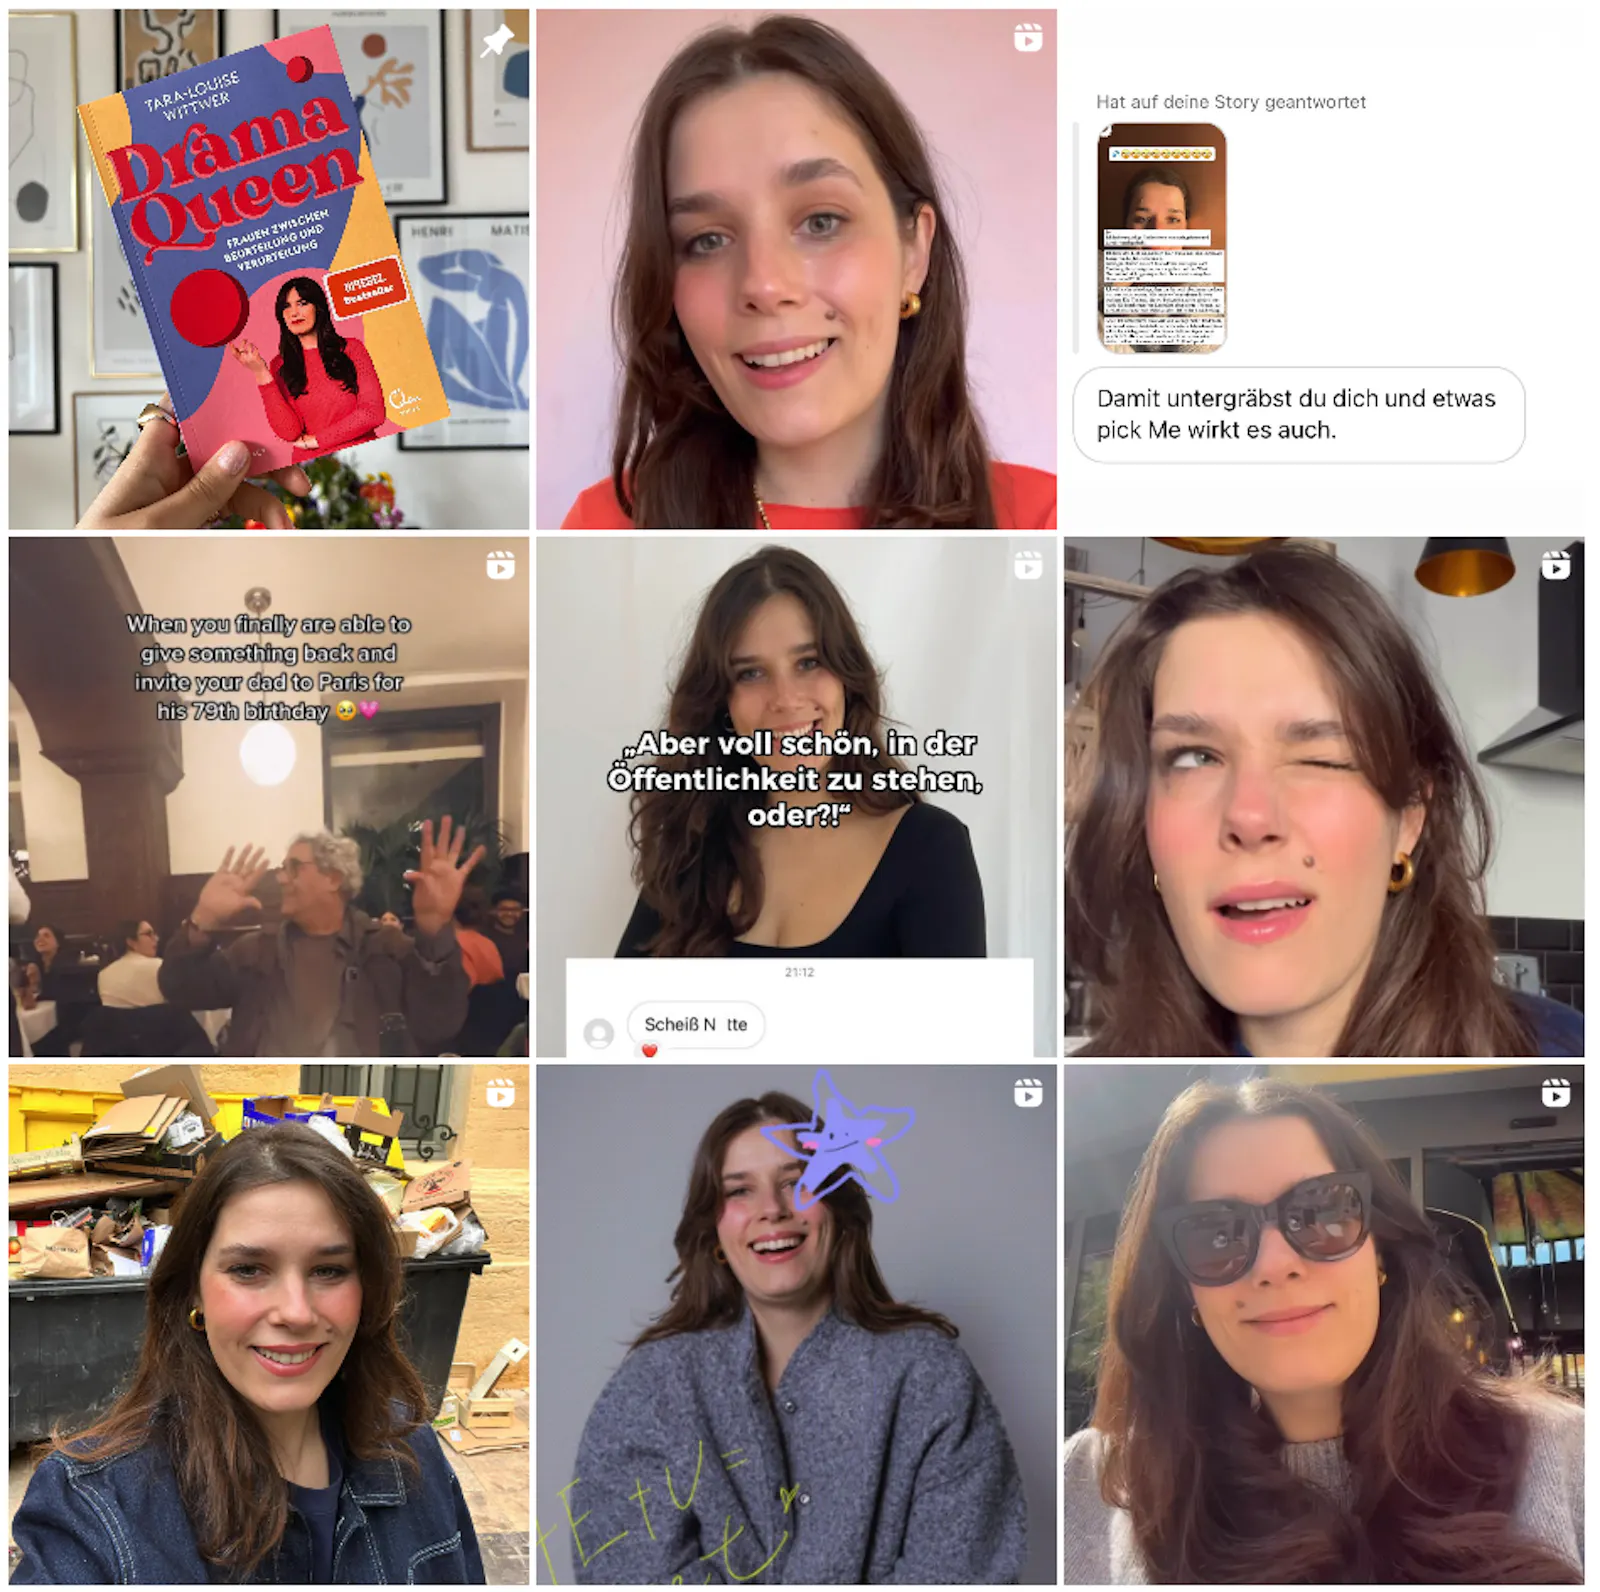 A selection of Tara-Louise Wittwer's Instagram posts, which feature close-ups of her face speaking to the camera, as well as her book.